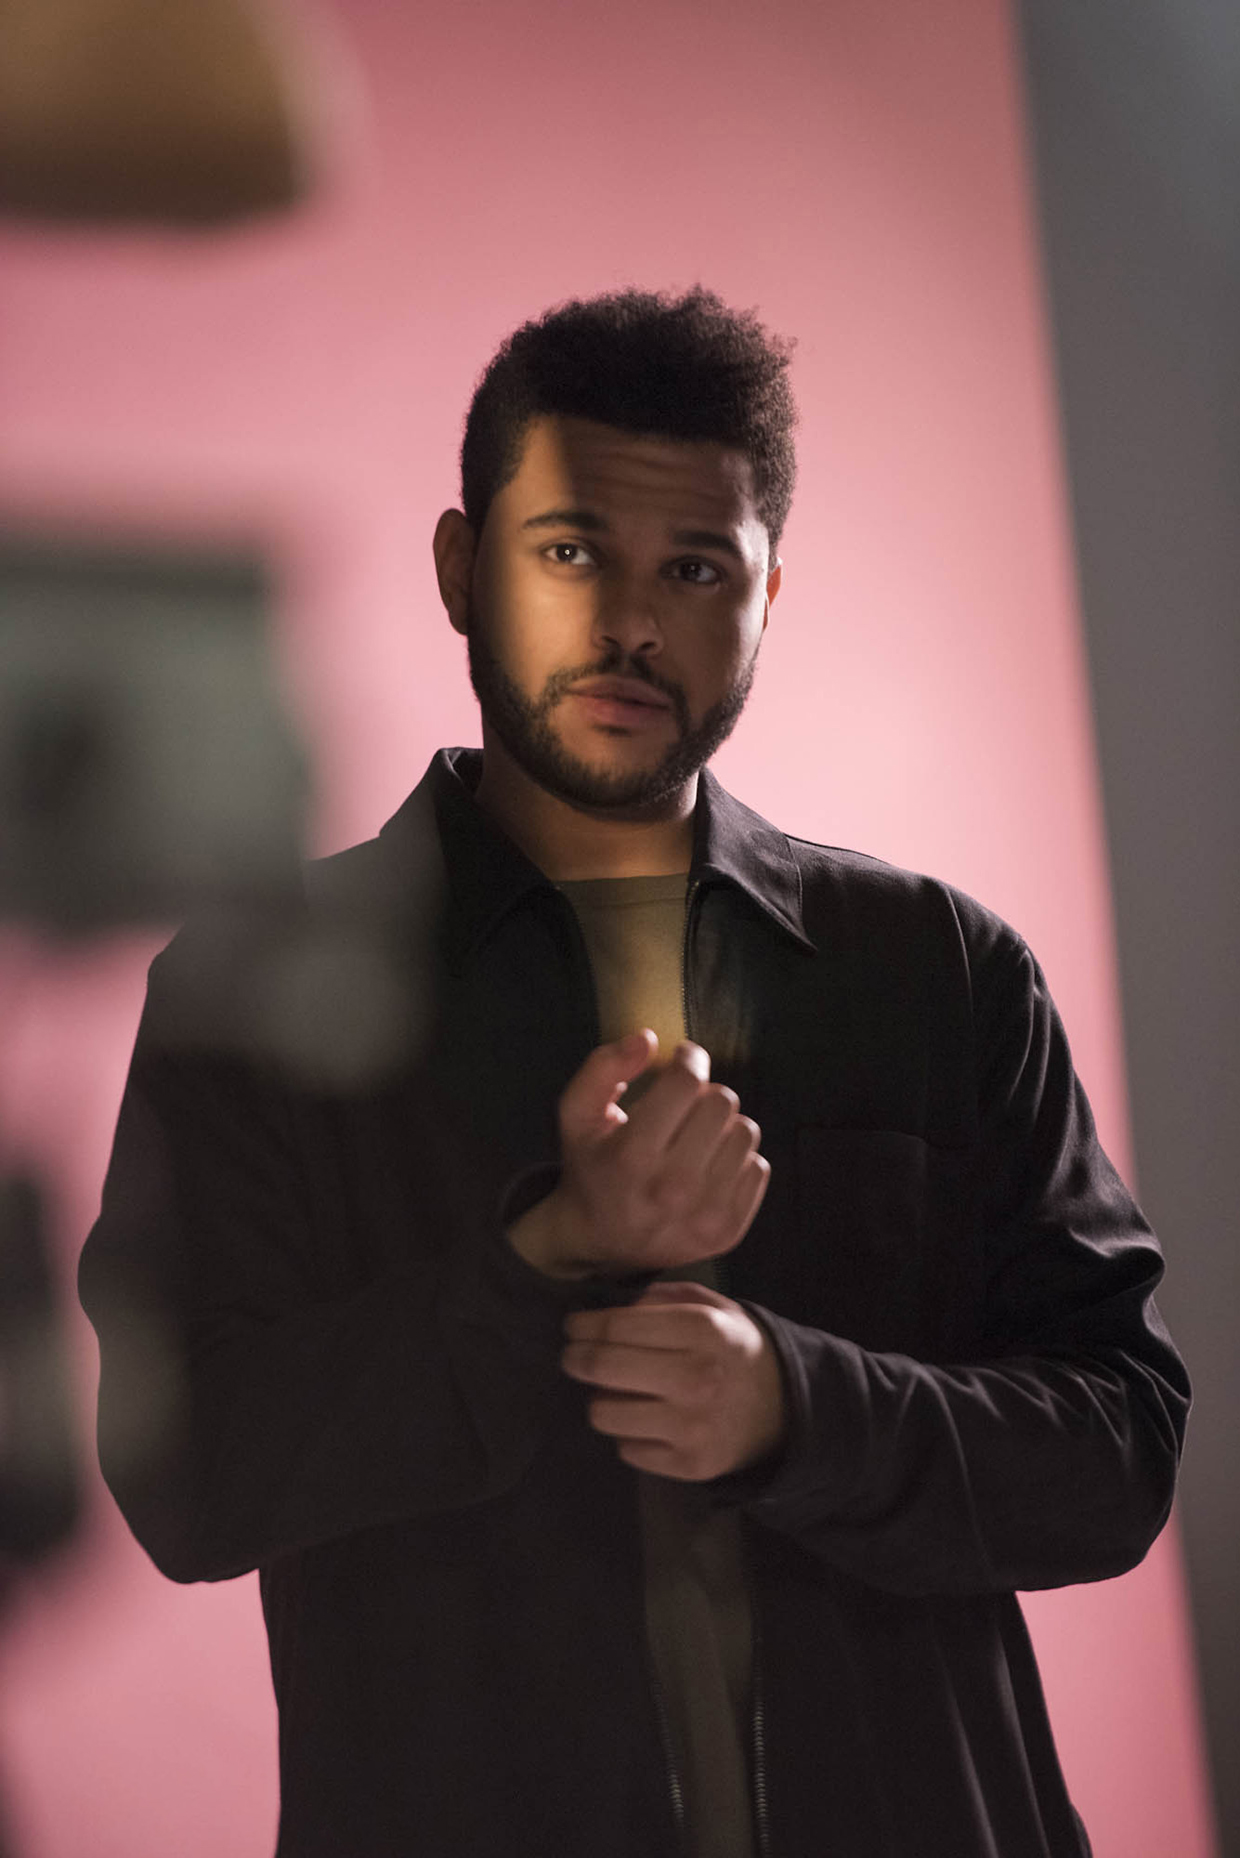 08-the-weeknd-h-and-m-spring-2017-billboard-embed.jpg